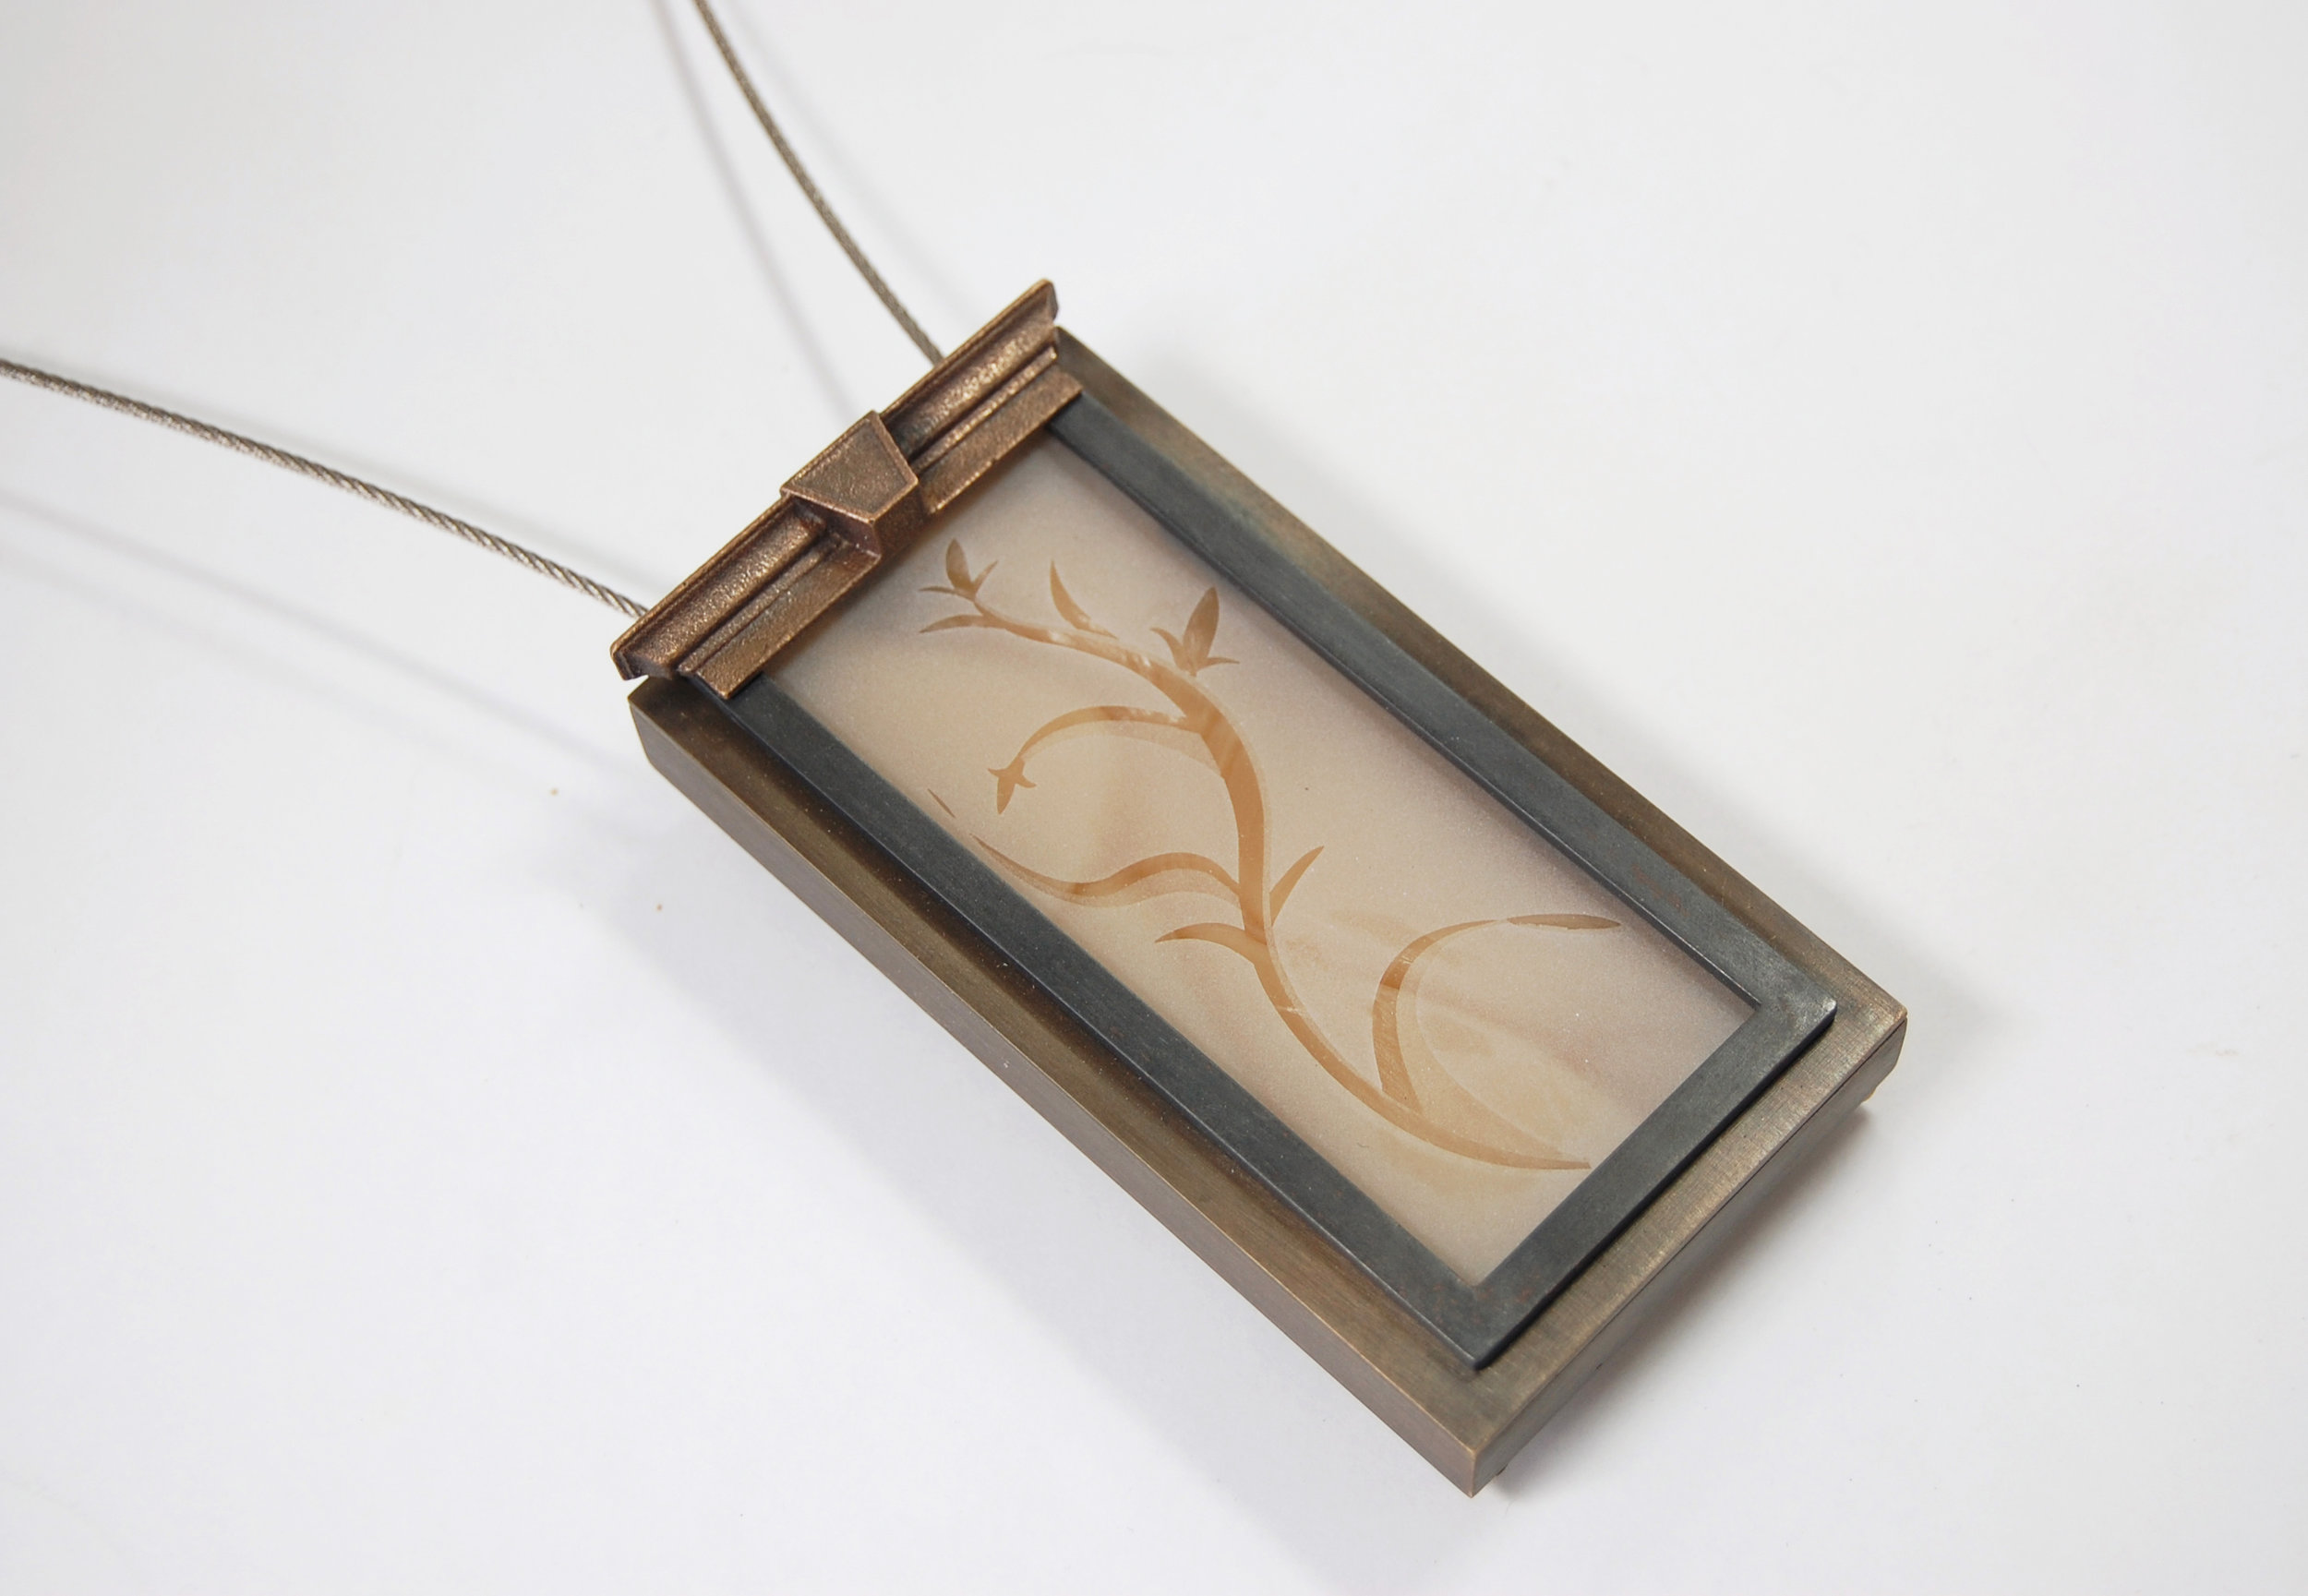  Figure 13:  Springwood,  cast bronze, nugold, steel cable, glass, silicone, 4 1/8” x 2 1/8” x 7/8” 